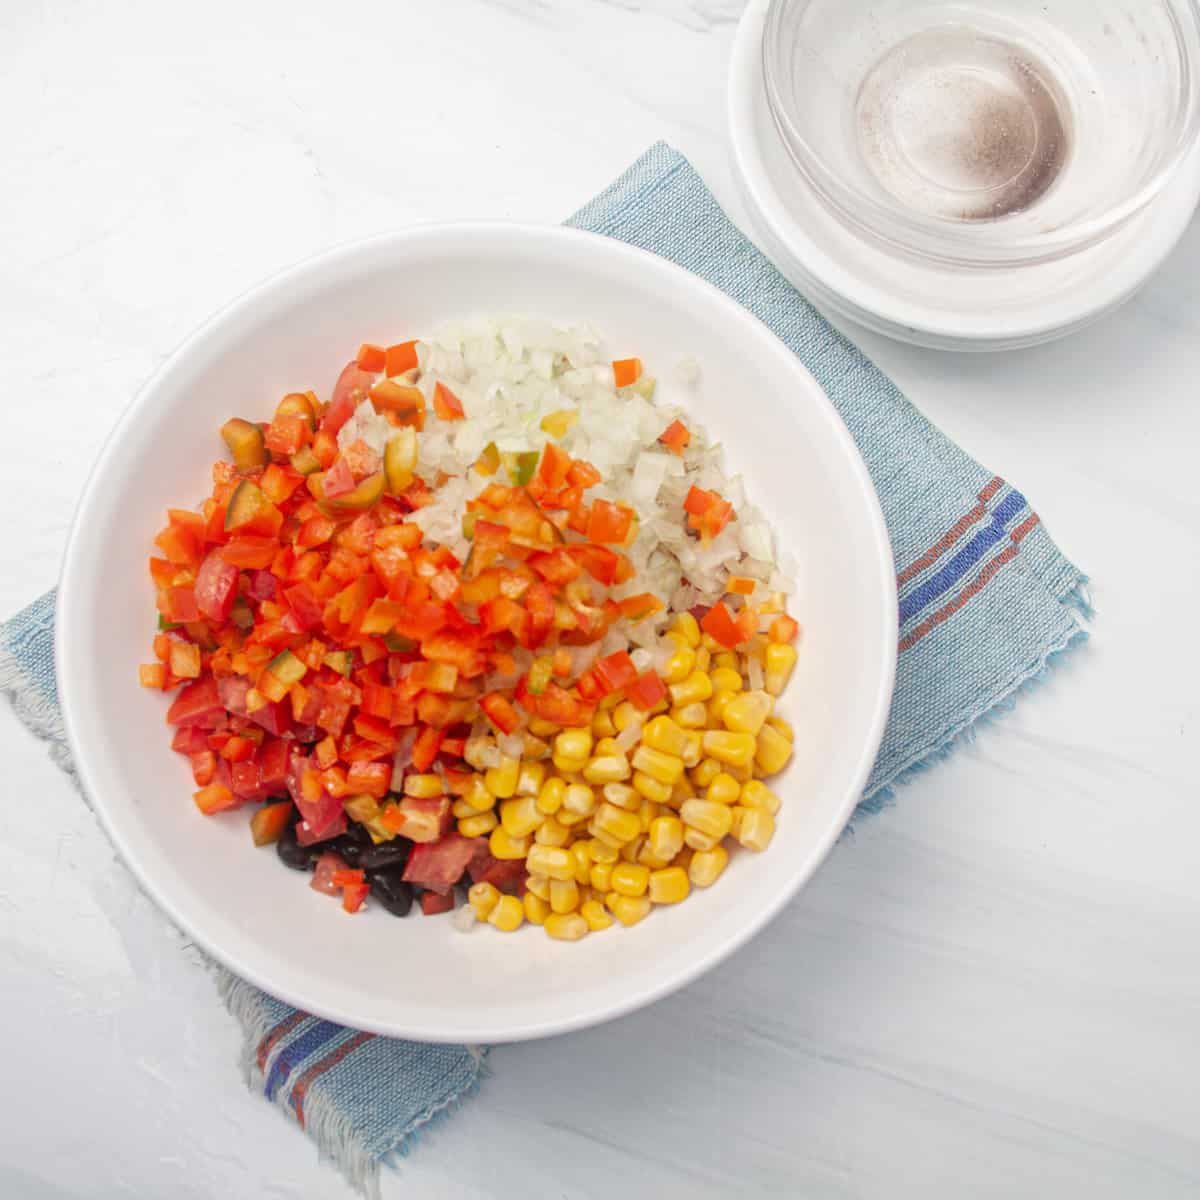 Drained beans, corn, diced tomatoes, chopped onions, and bell peppers combined in a bowl.